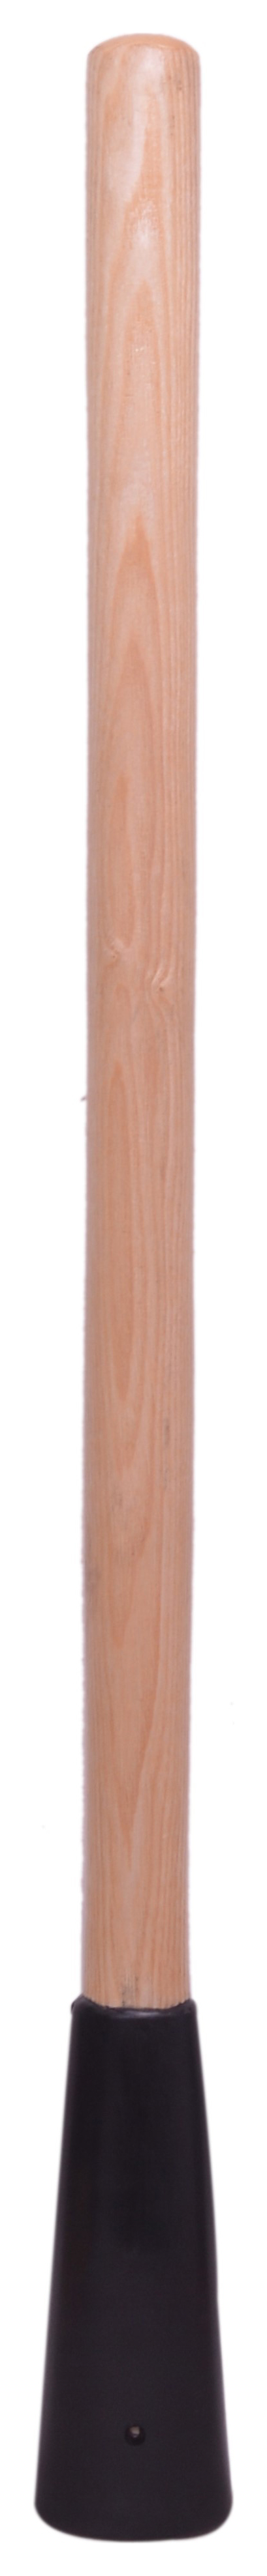 Image of Wickes Wooden Pick Axe Handle - 900mm